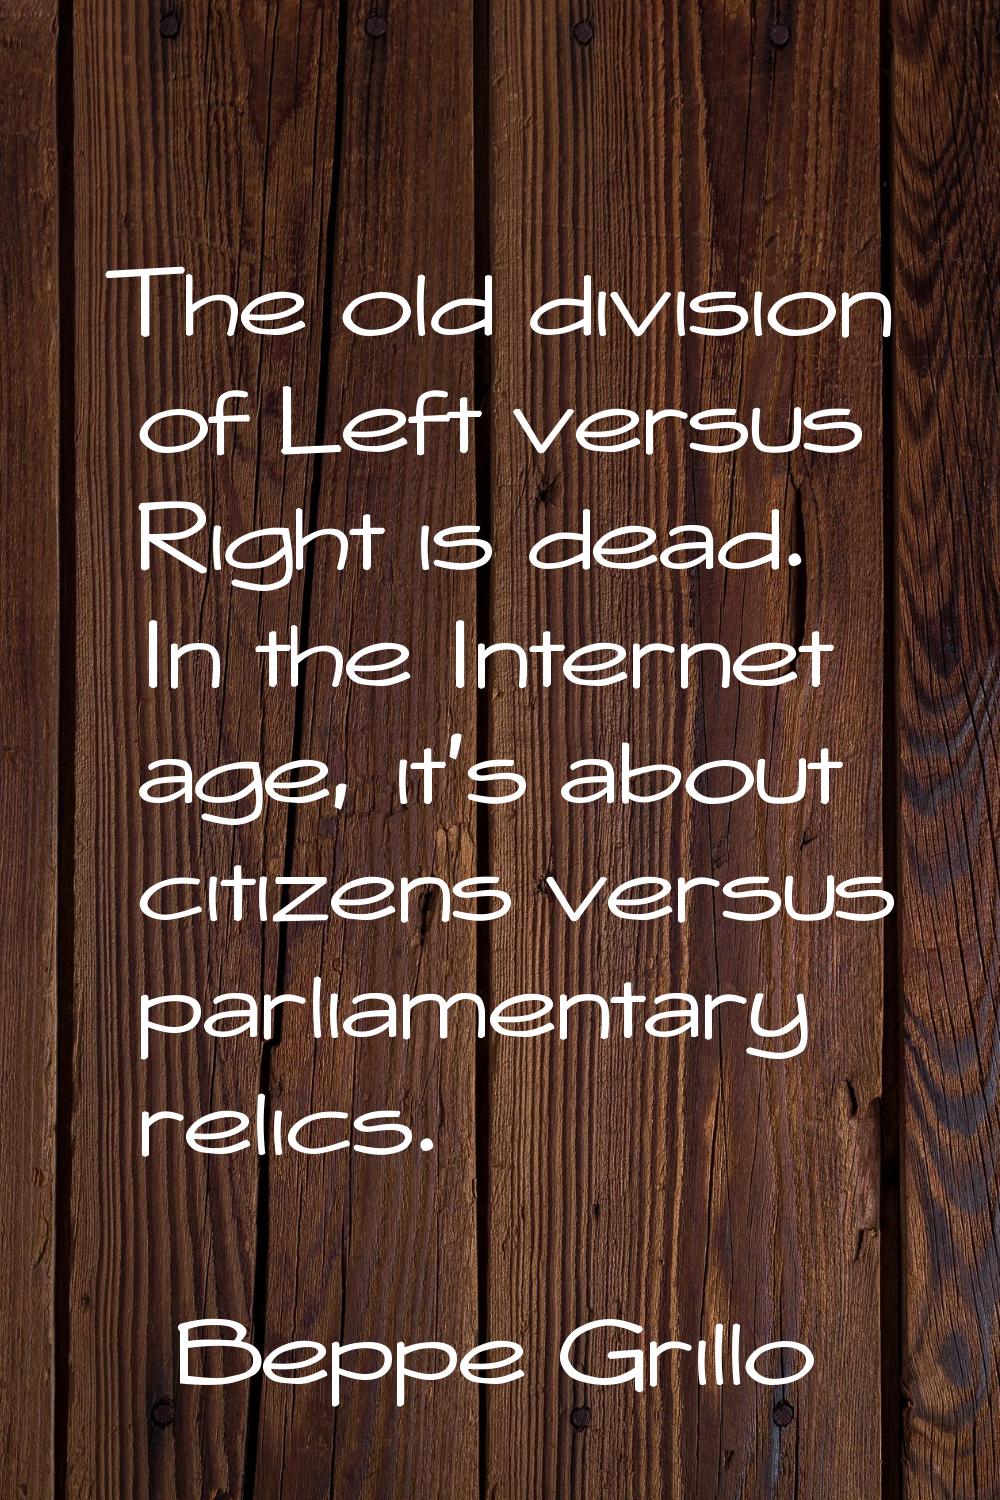 The old division of Left versus Right is dead. In the Internet age, it's about citizens versus parl